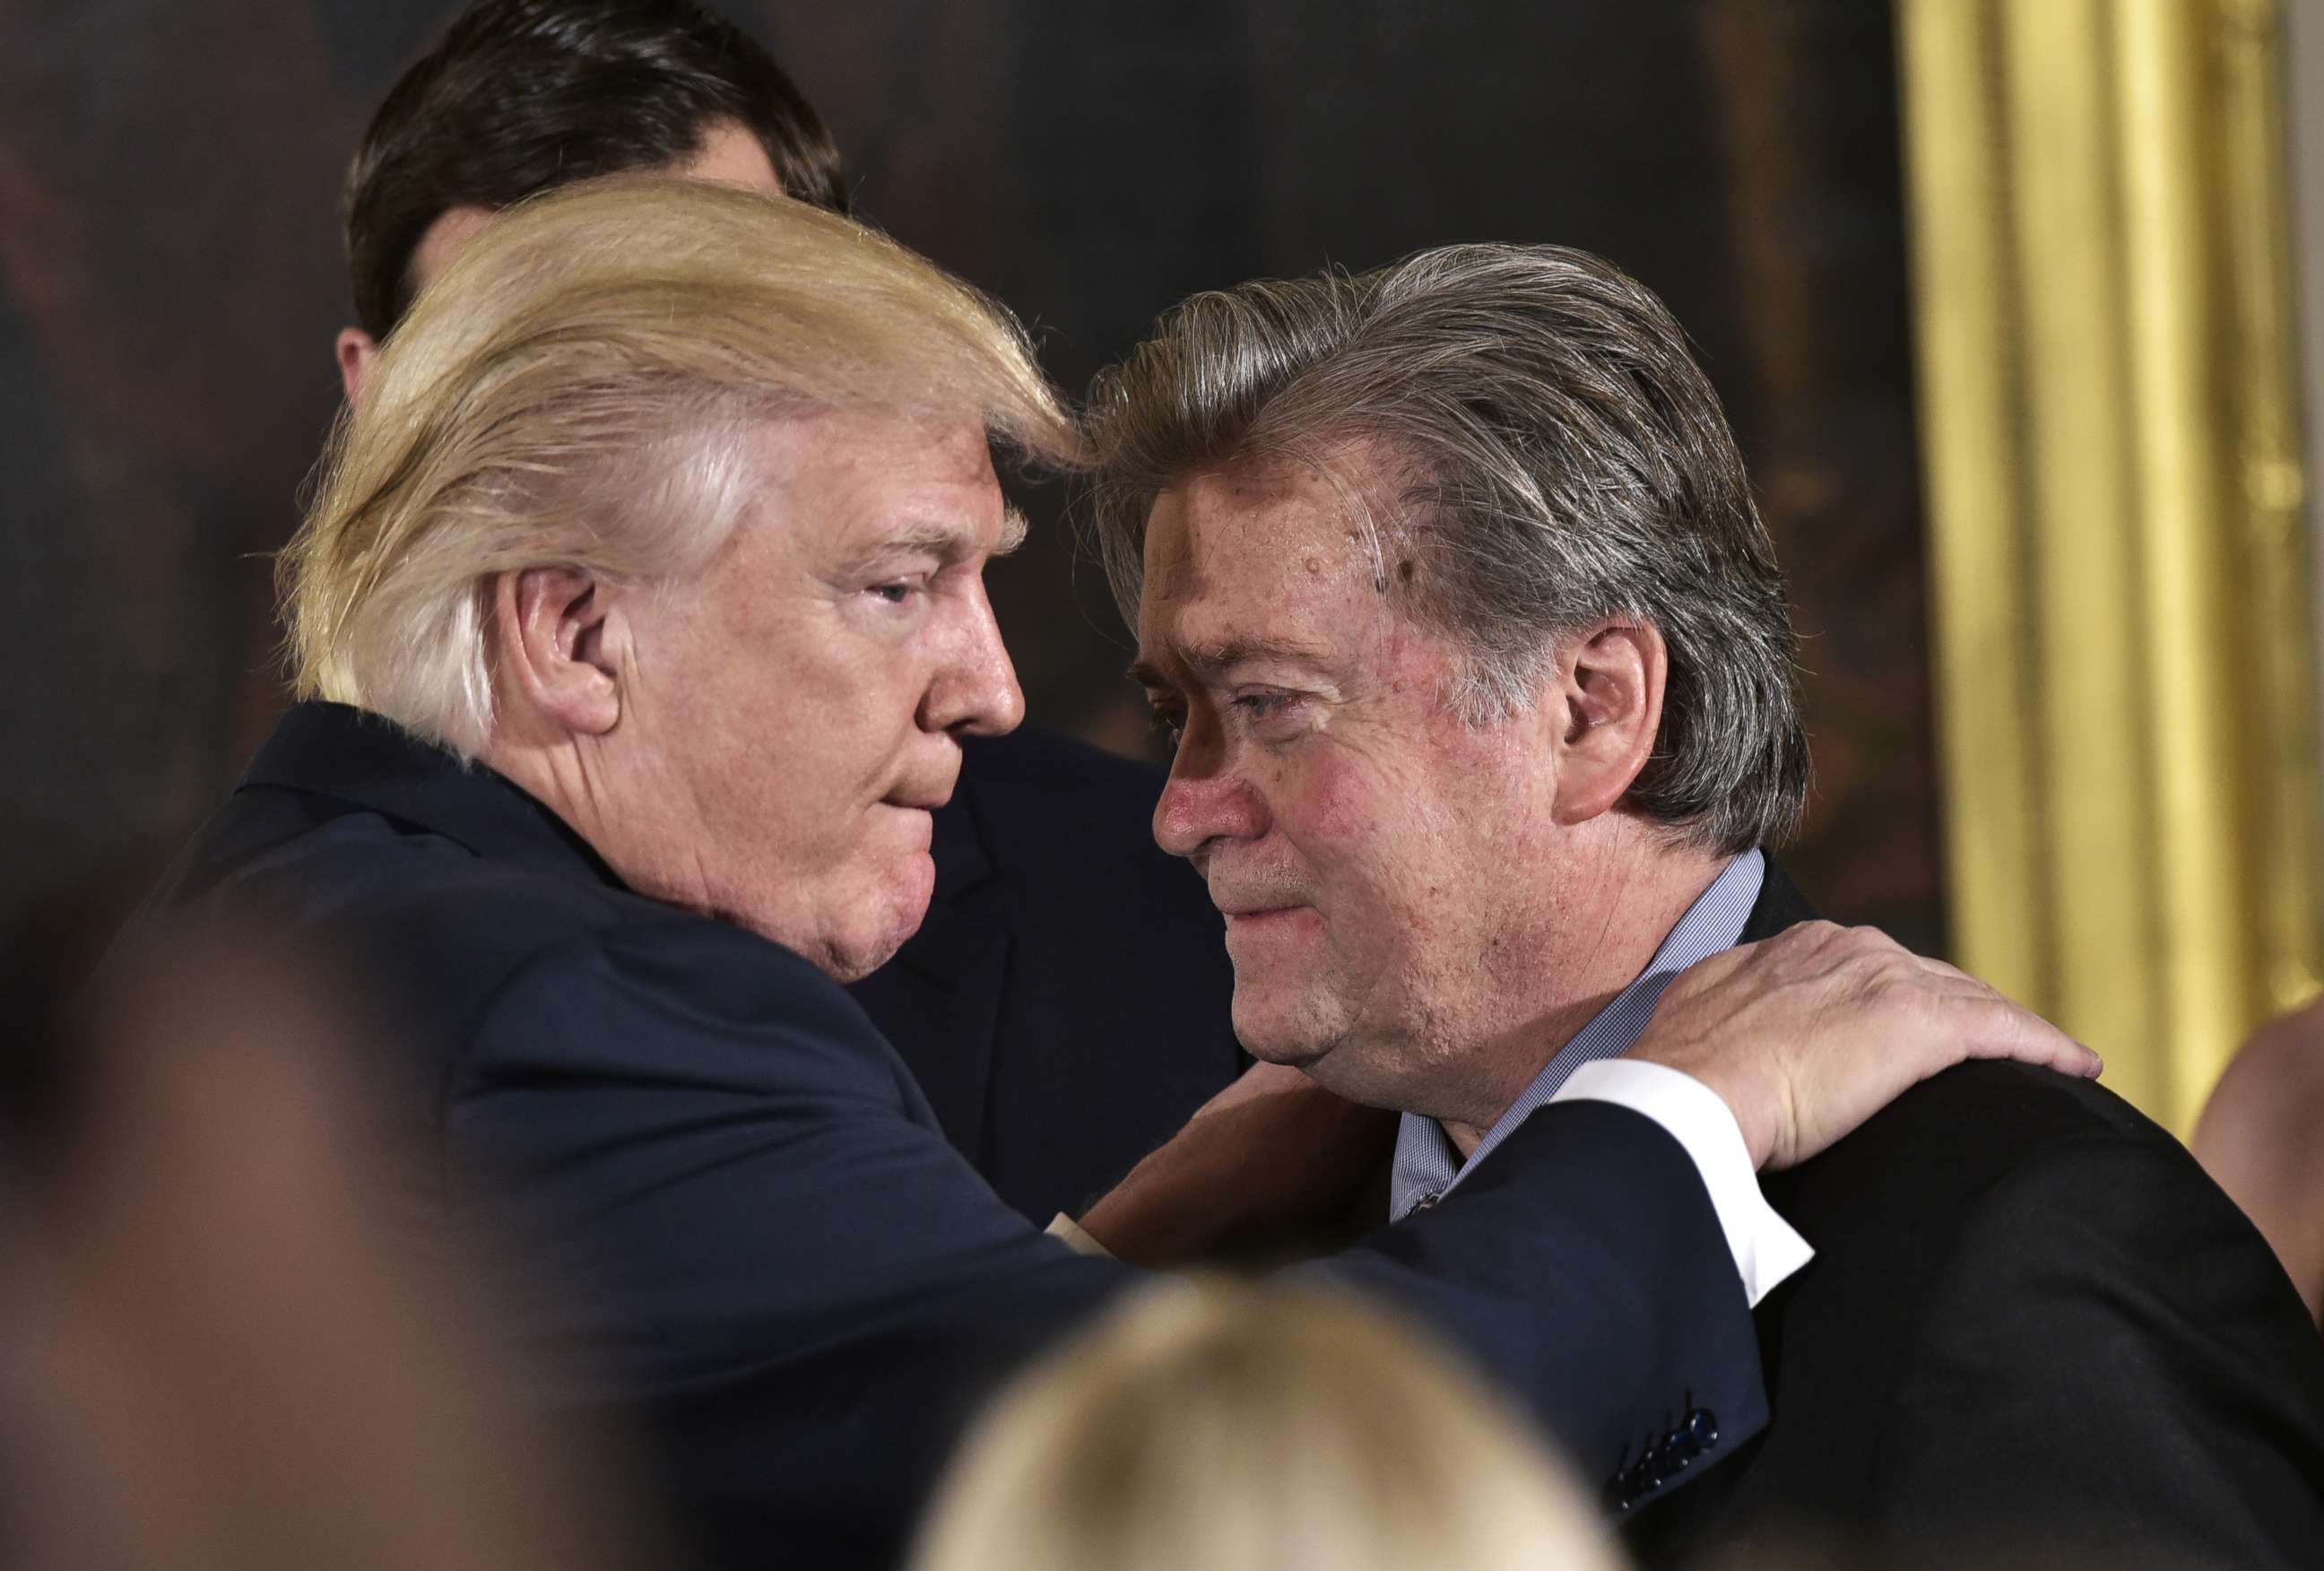 PHOTO: President Donald Trump congratulates Senior Counselor to the President Stephen Bannon during the swearing-in of senior staff in the East Room of the White House on Jan. 22, 2017.